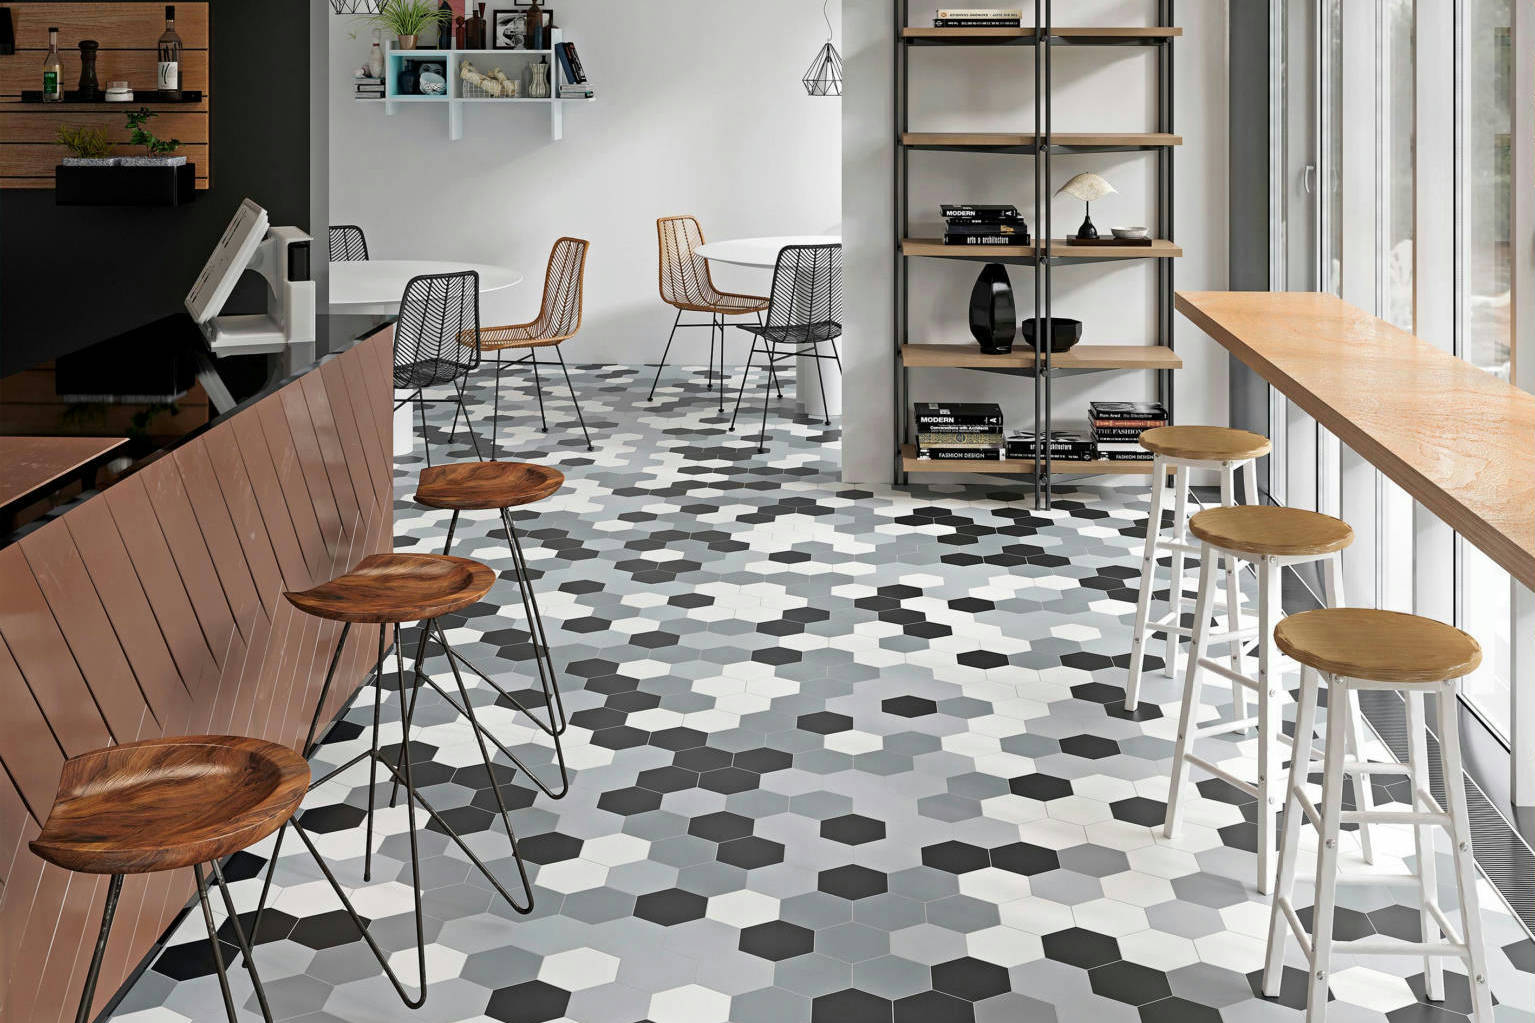 Vida 5.5X6.3” Black, Grey, Pearl, and White  Hexagons | Qualis Ceramica | Luxury Tile and Vinyl at affordable prices